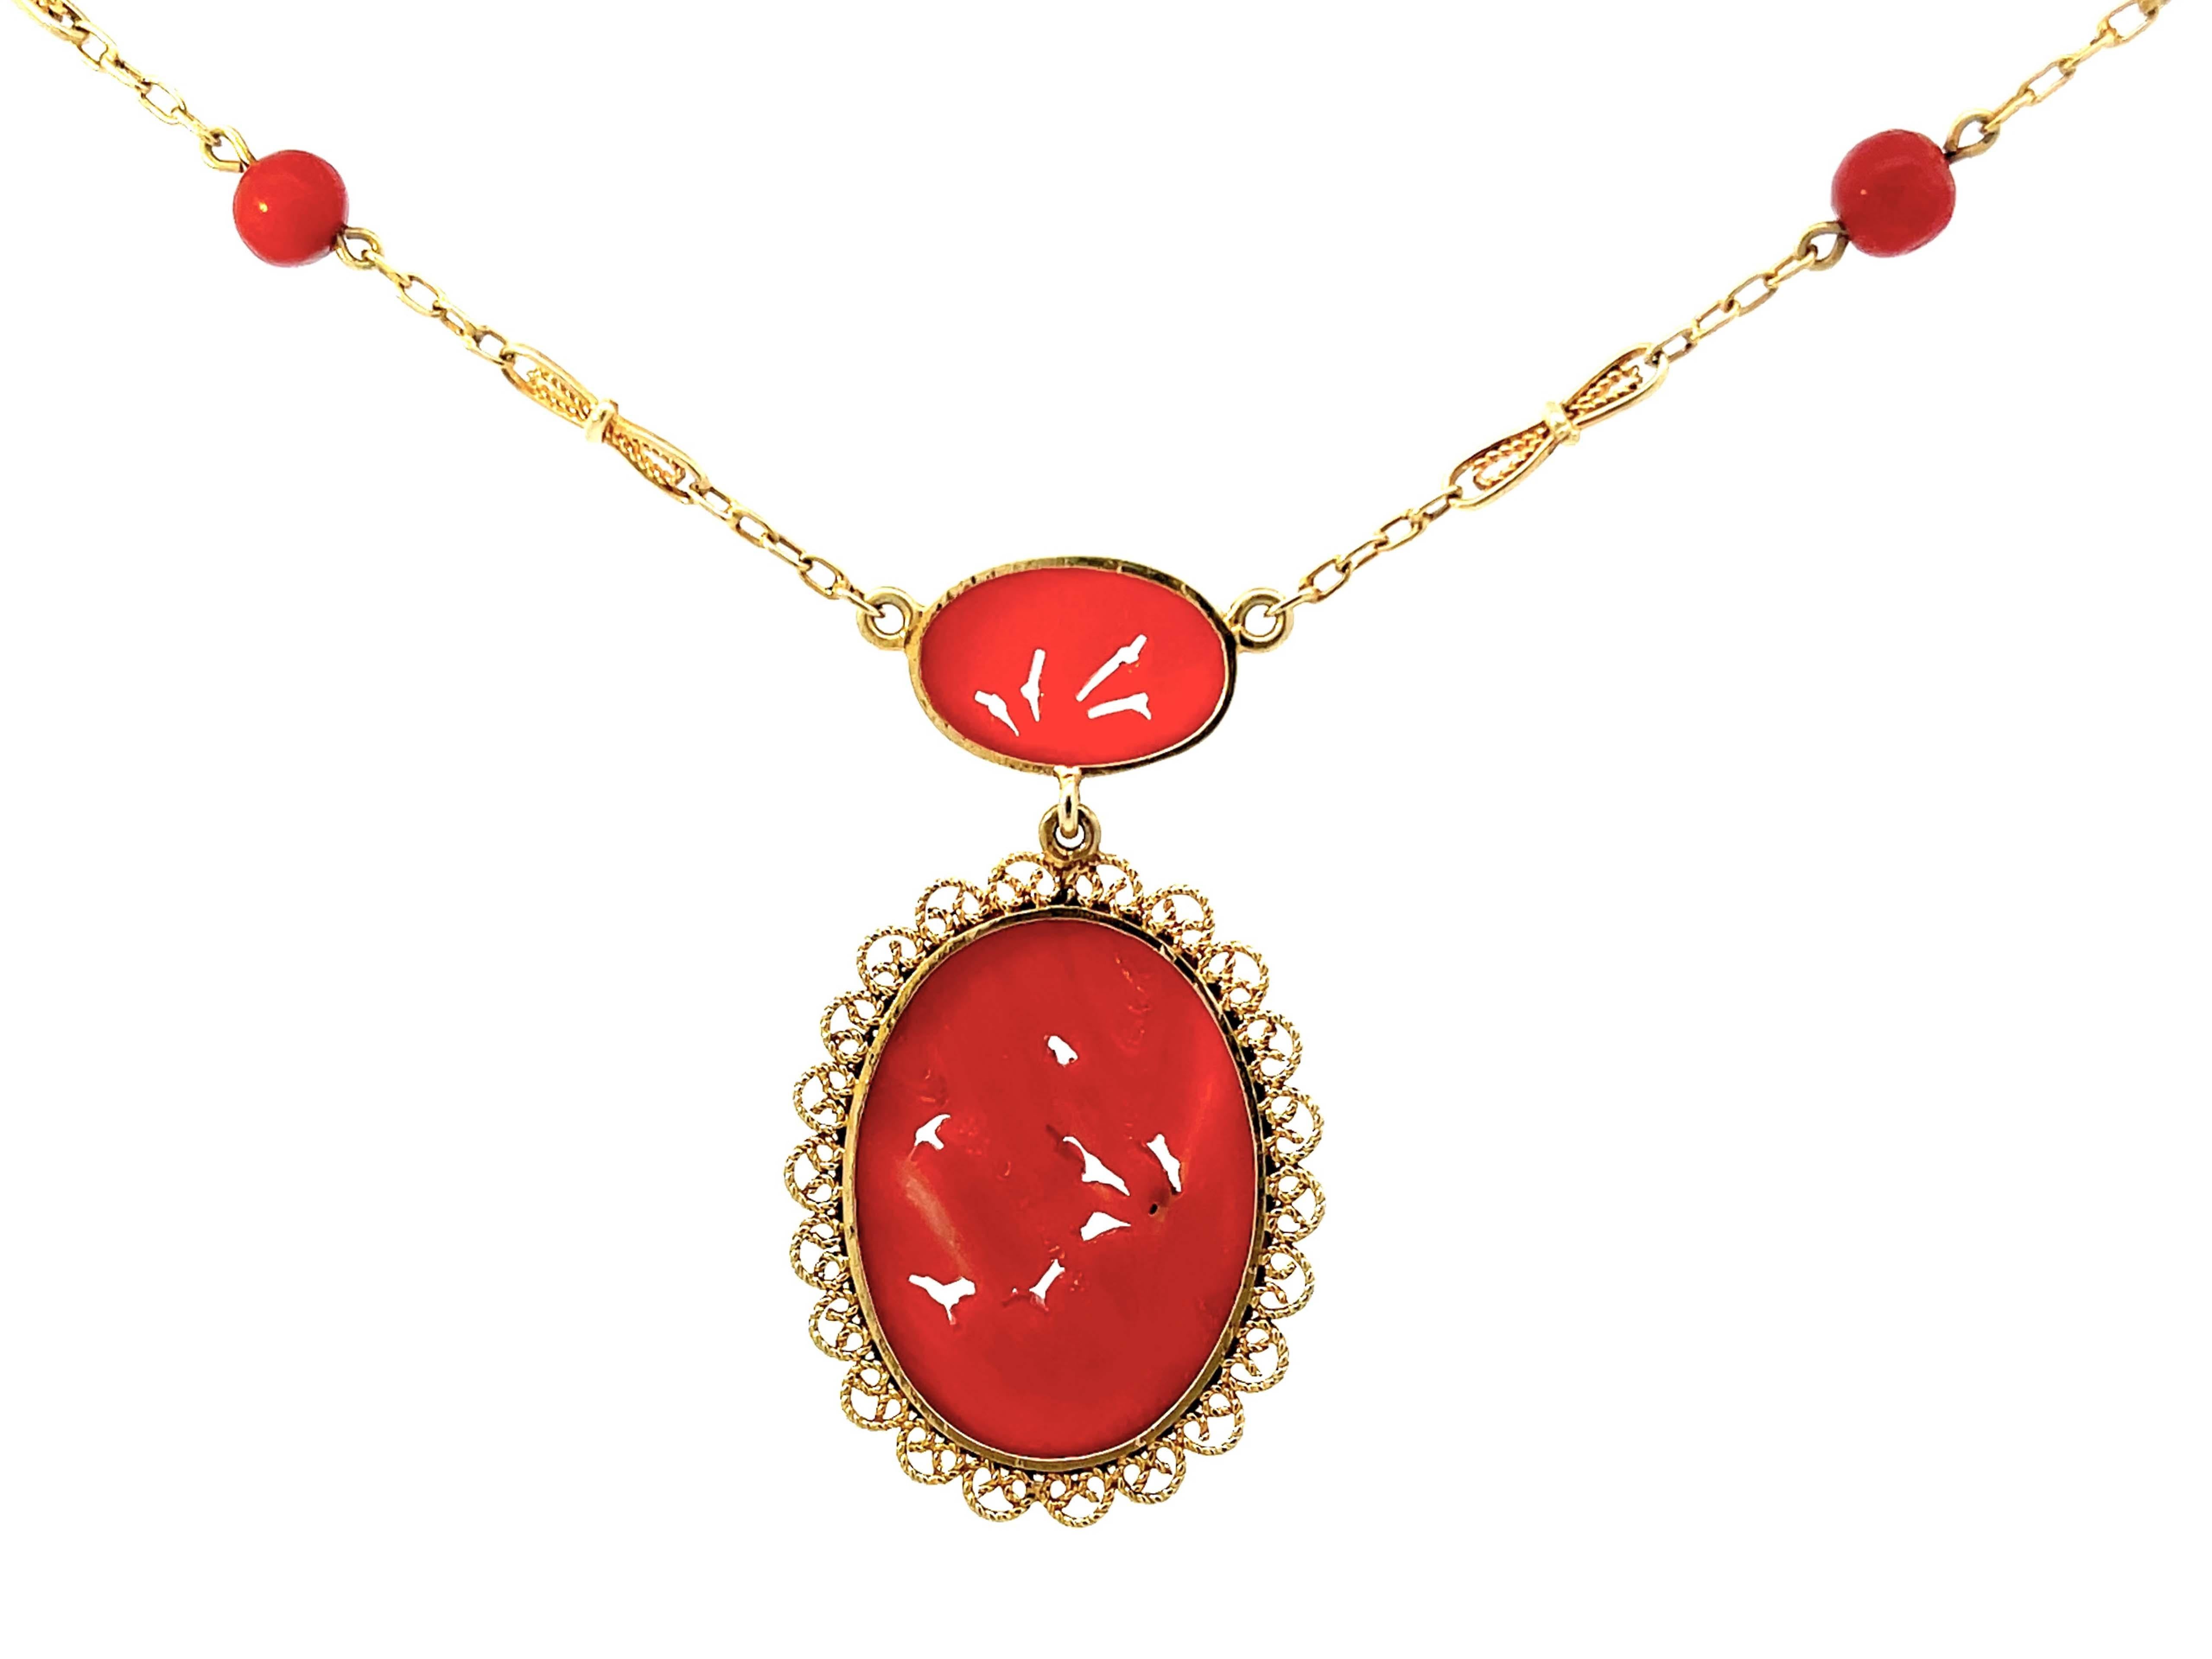 Oval Cut Vintage Carved Red Coral Necklace with Floral Design in 14K Yellow Gold For Sale